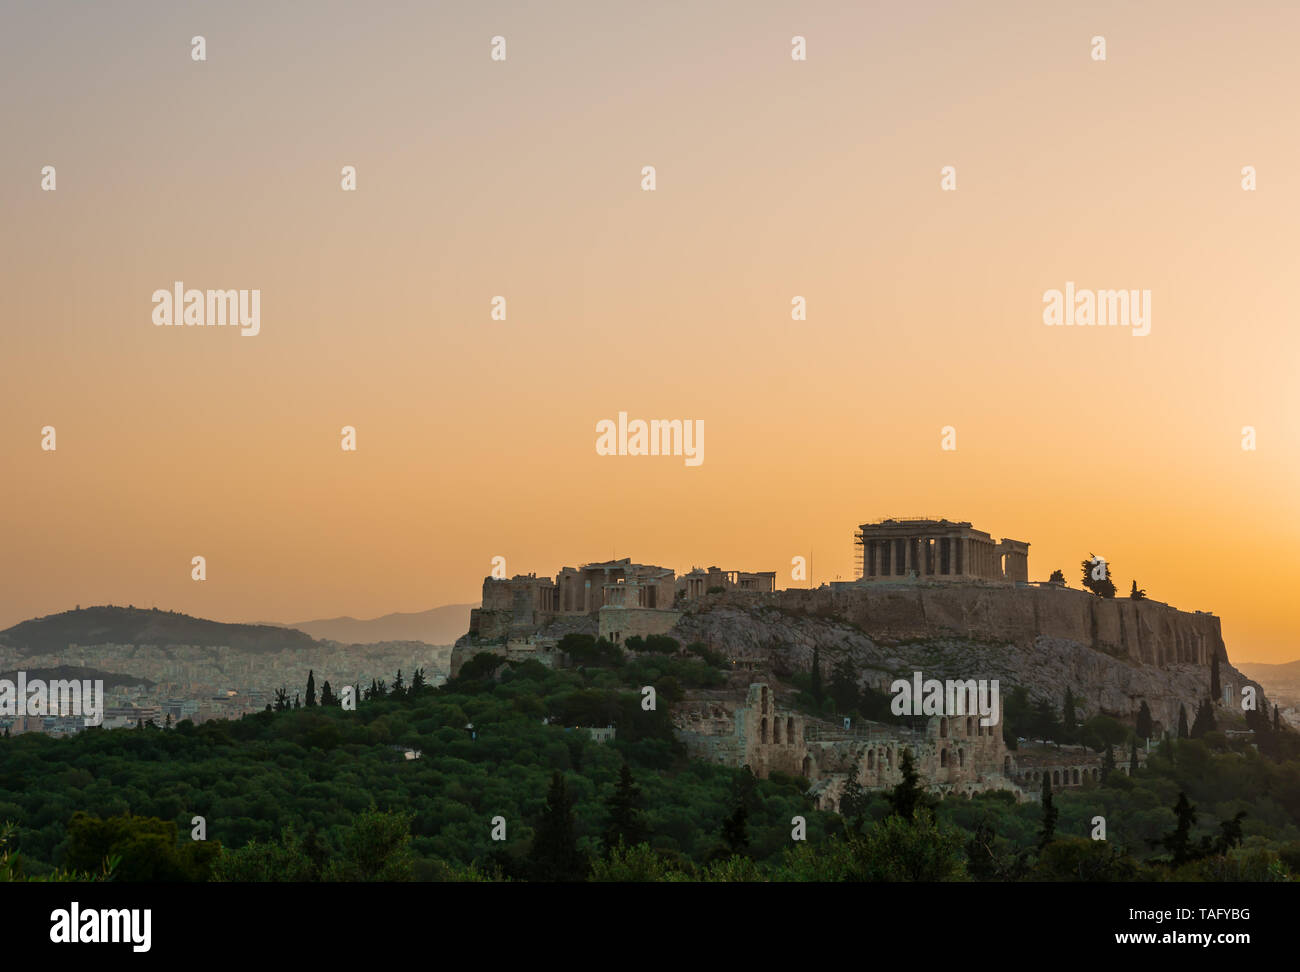 Acropolis of Athens with the Parthenon temple during the sunrise, Athens, Greece Stock Photo